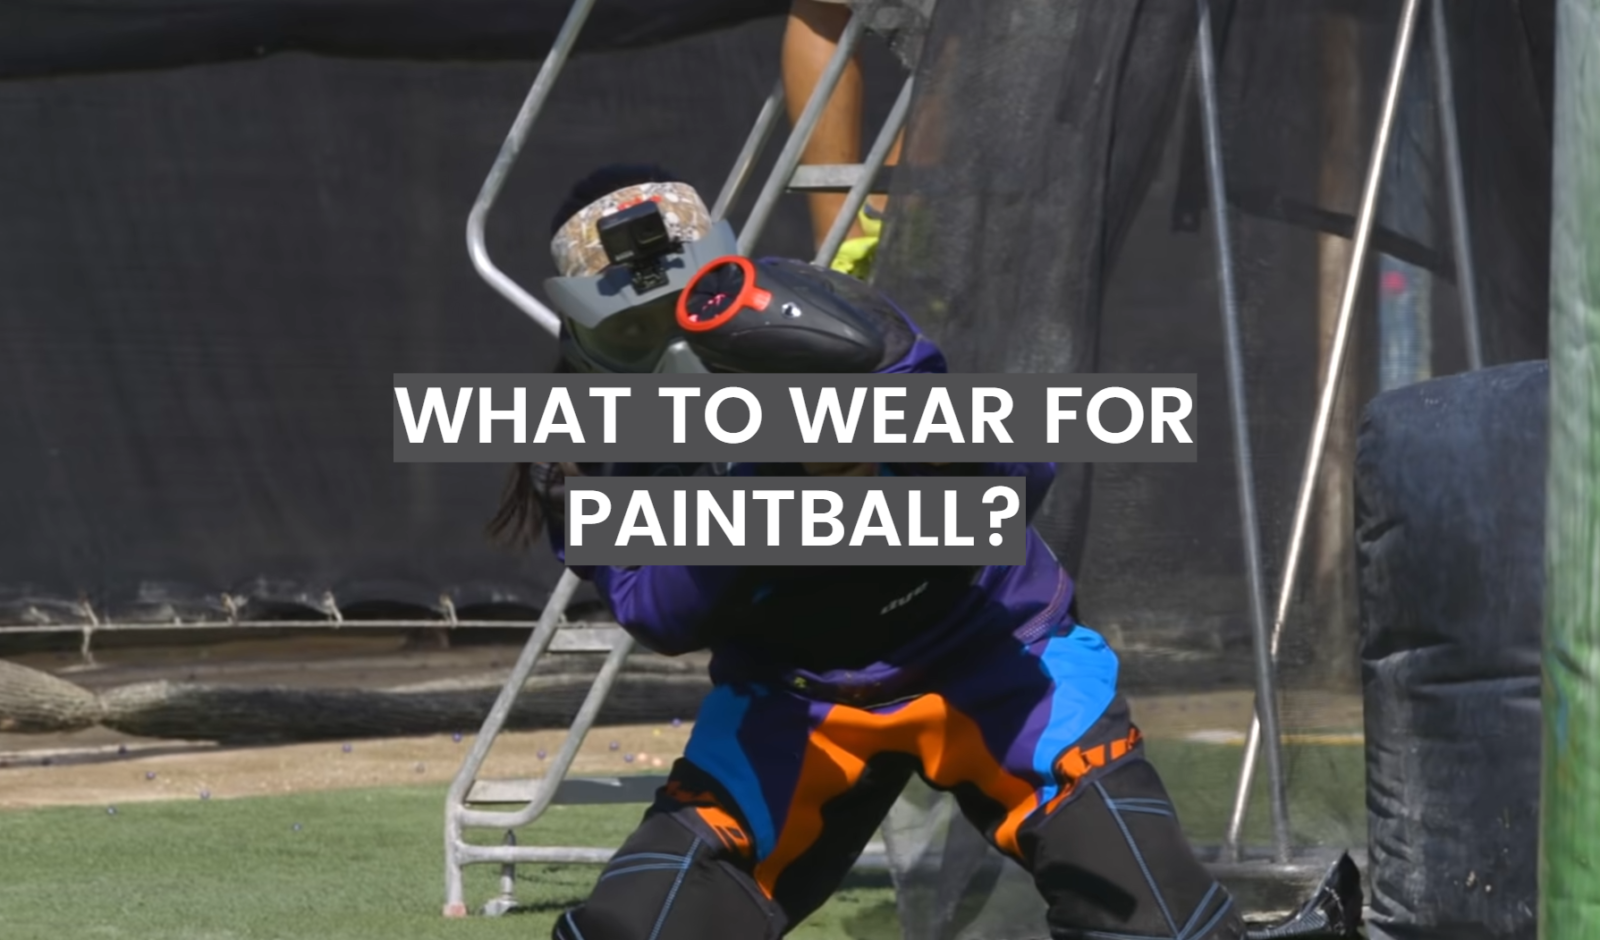 What to Wear for Paintball?